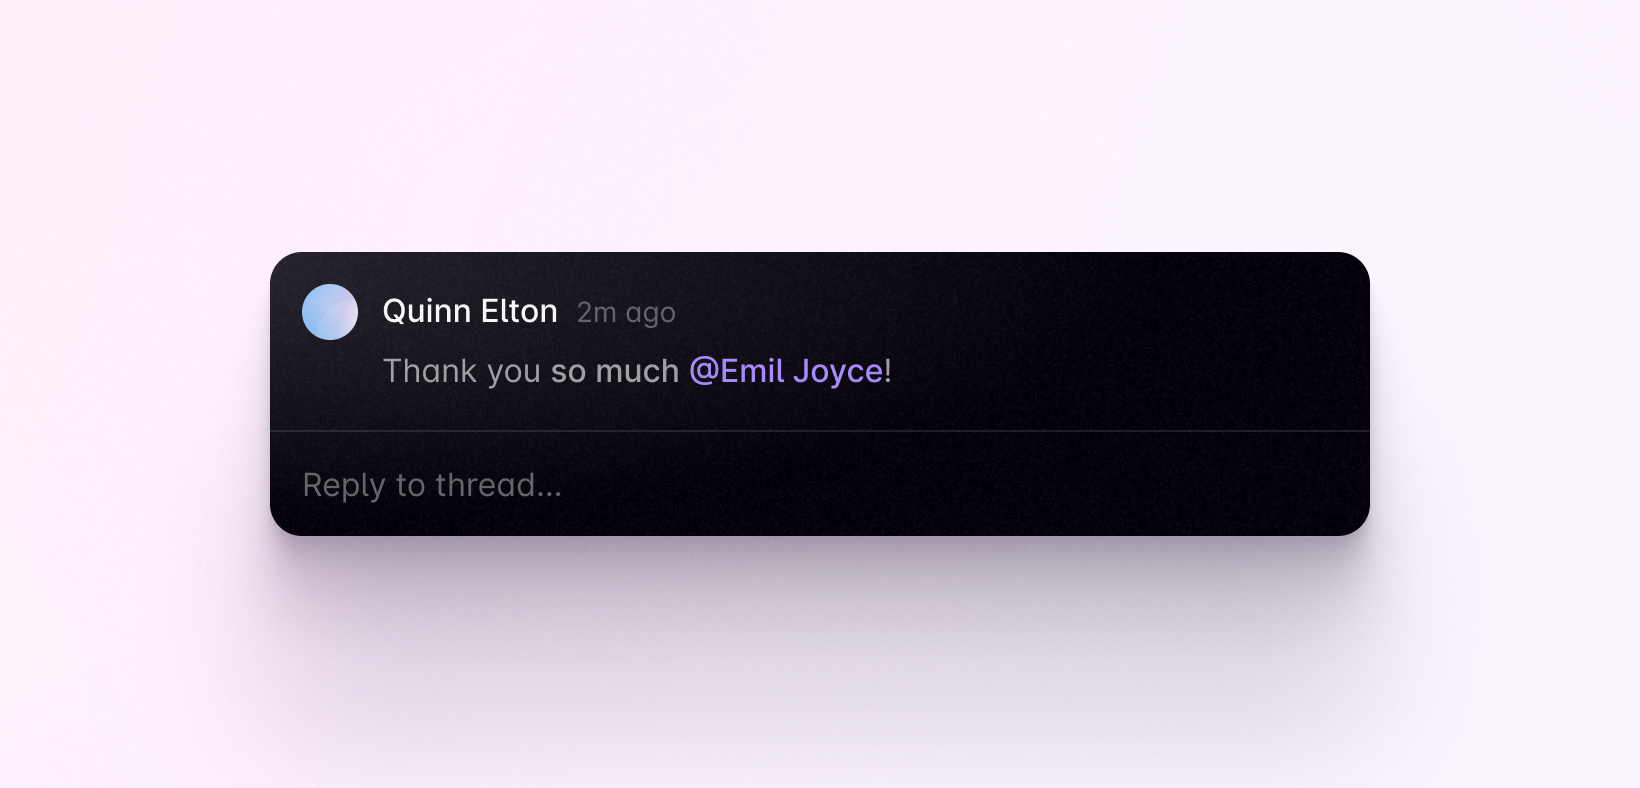 Comment with example body: 'Thank you so much @Emil Joyce!', with 'so much' in bold